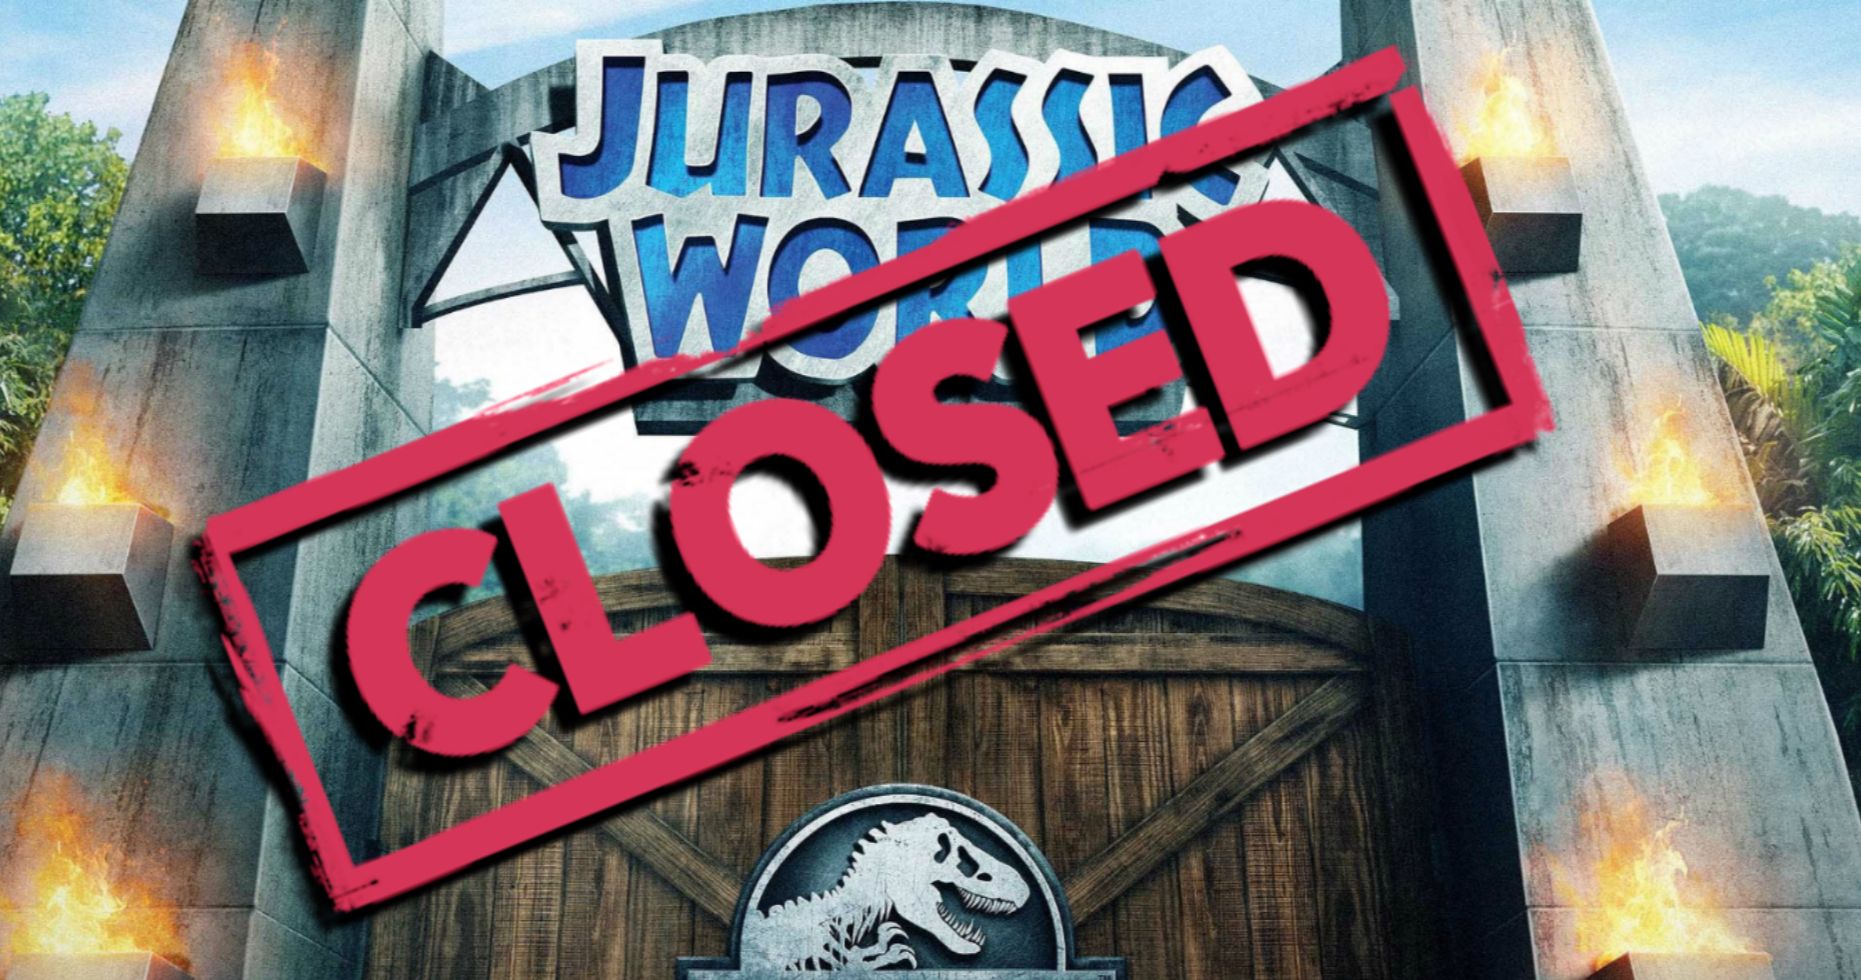 The Park Is Closed as Jurassic World 3 Shoot Goes on Temporary Hiatus